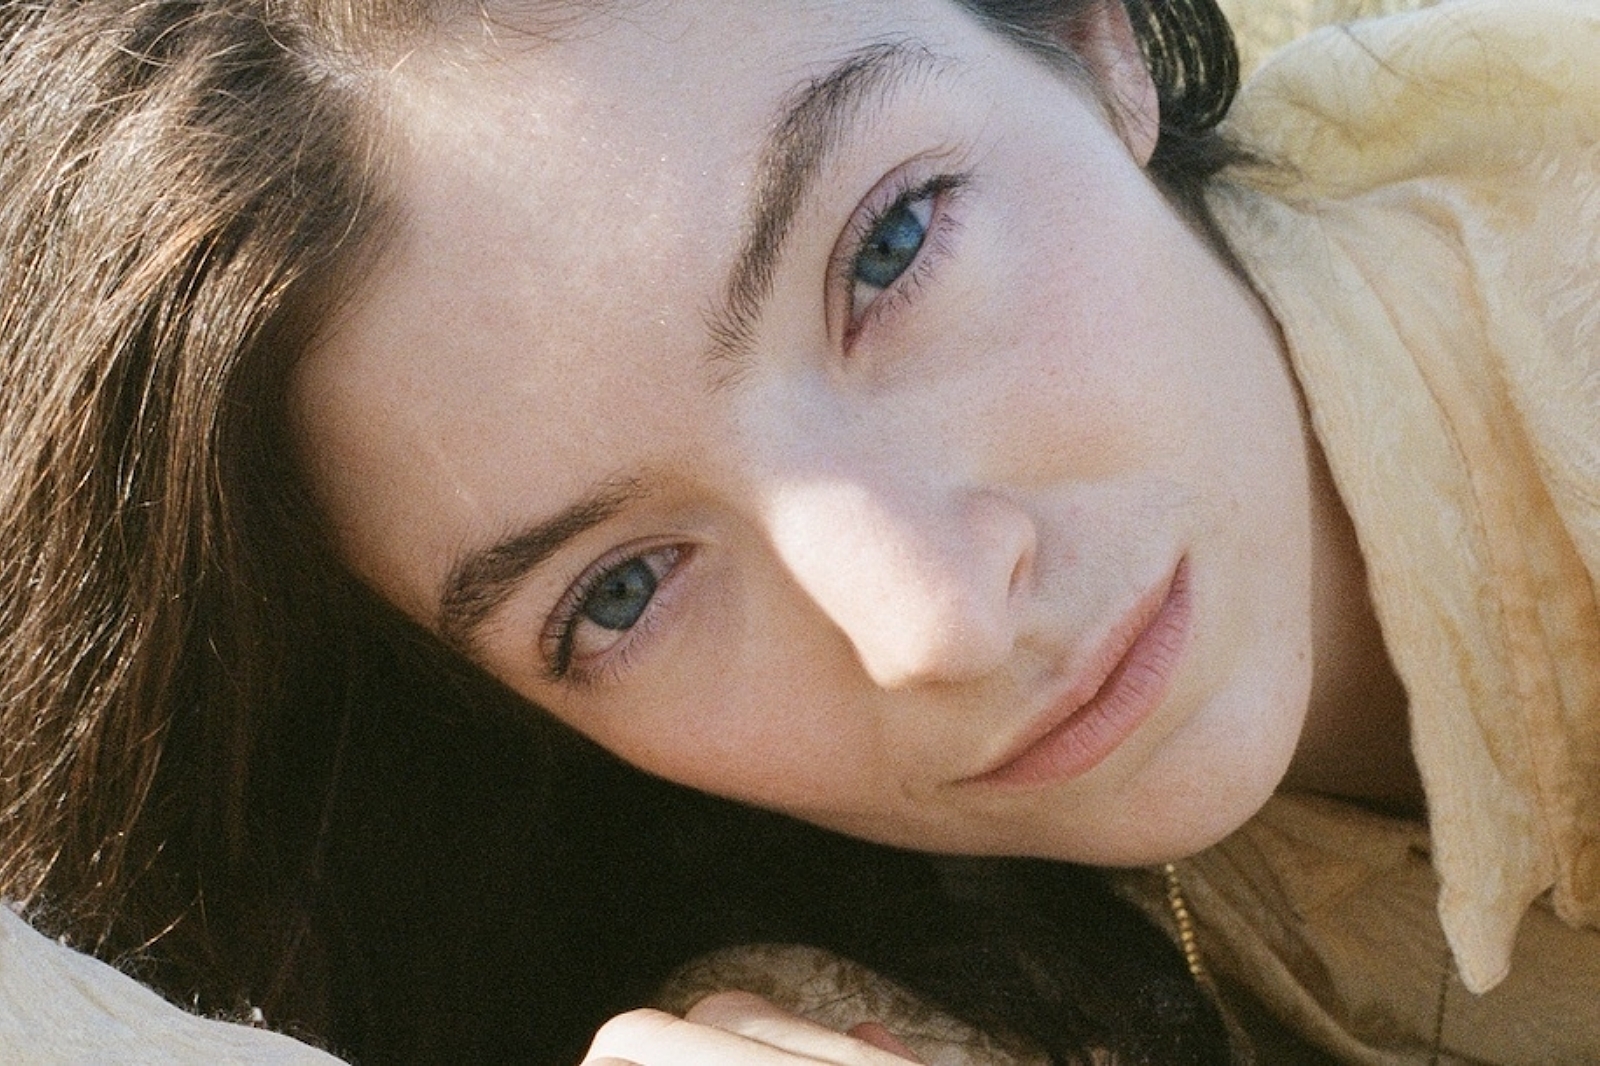 Lorde shares two new songs